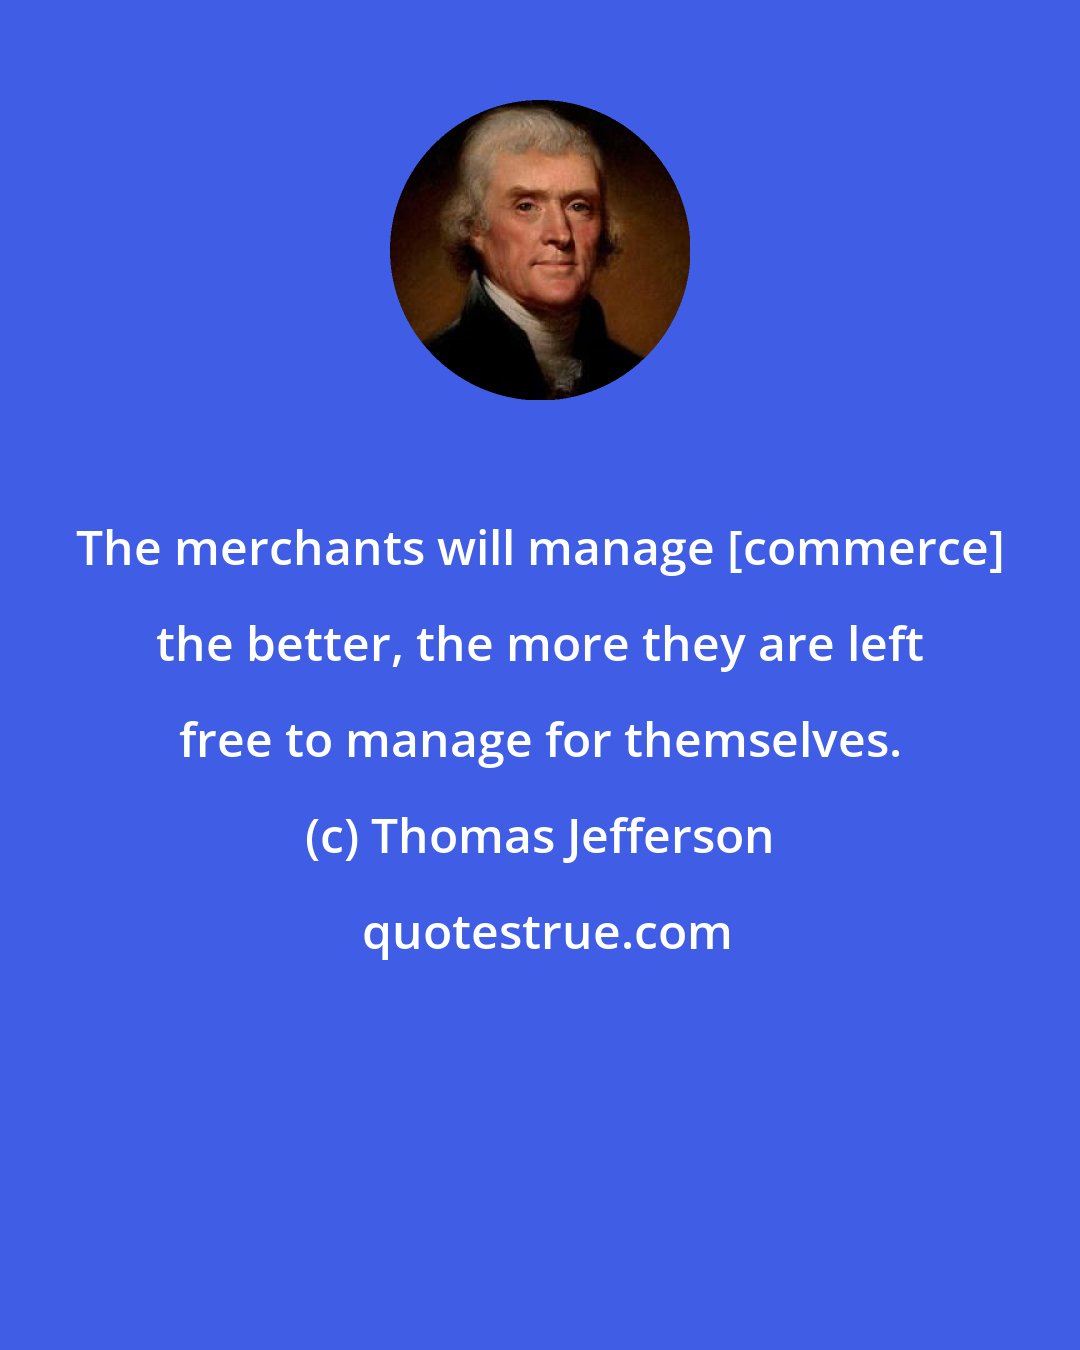 Thomas Jefferson: The merchants will manage [commerce] the better, the more they are left free to manage for themselves.